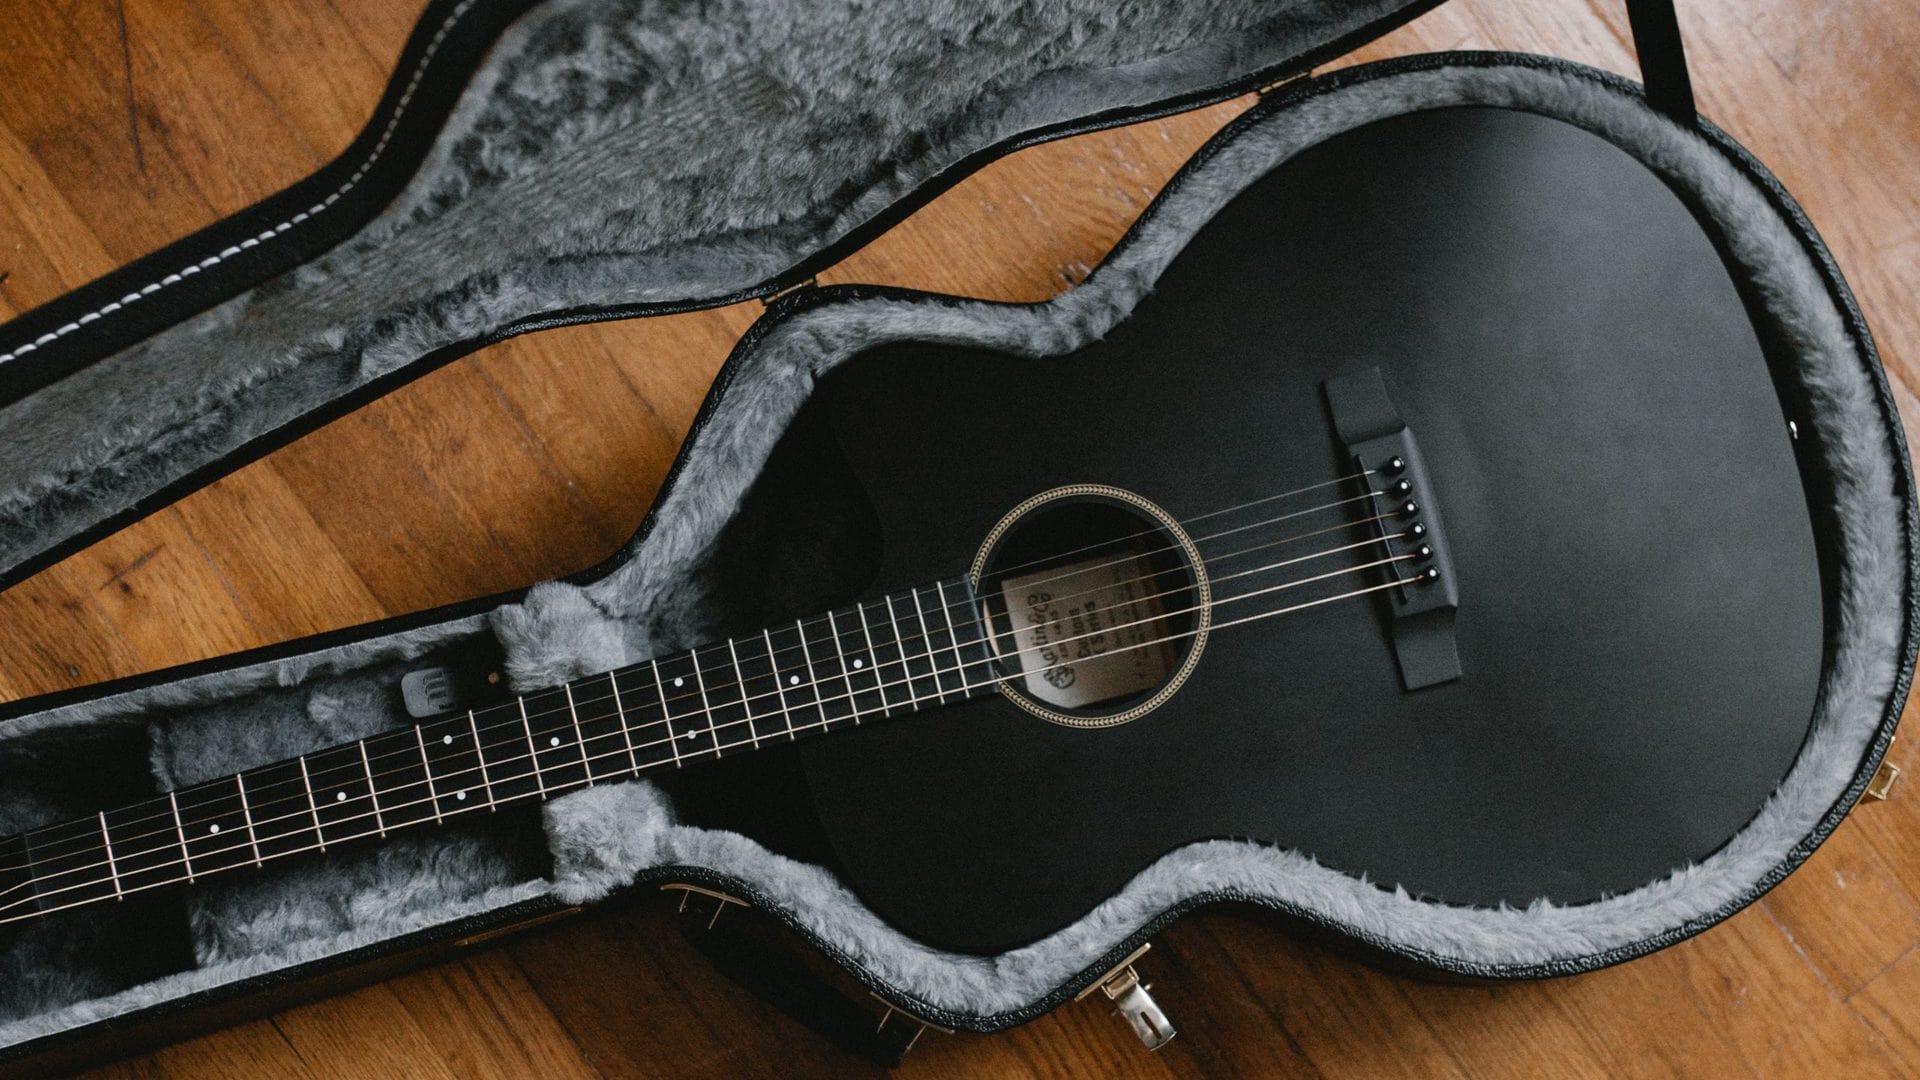 A an acoustic guitar plays in an open case, potentially in DADGAD tuning.